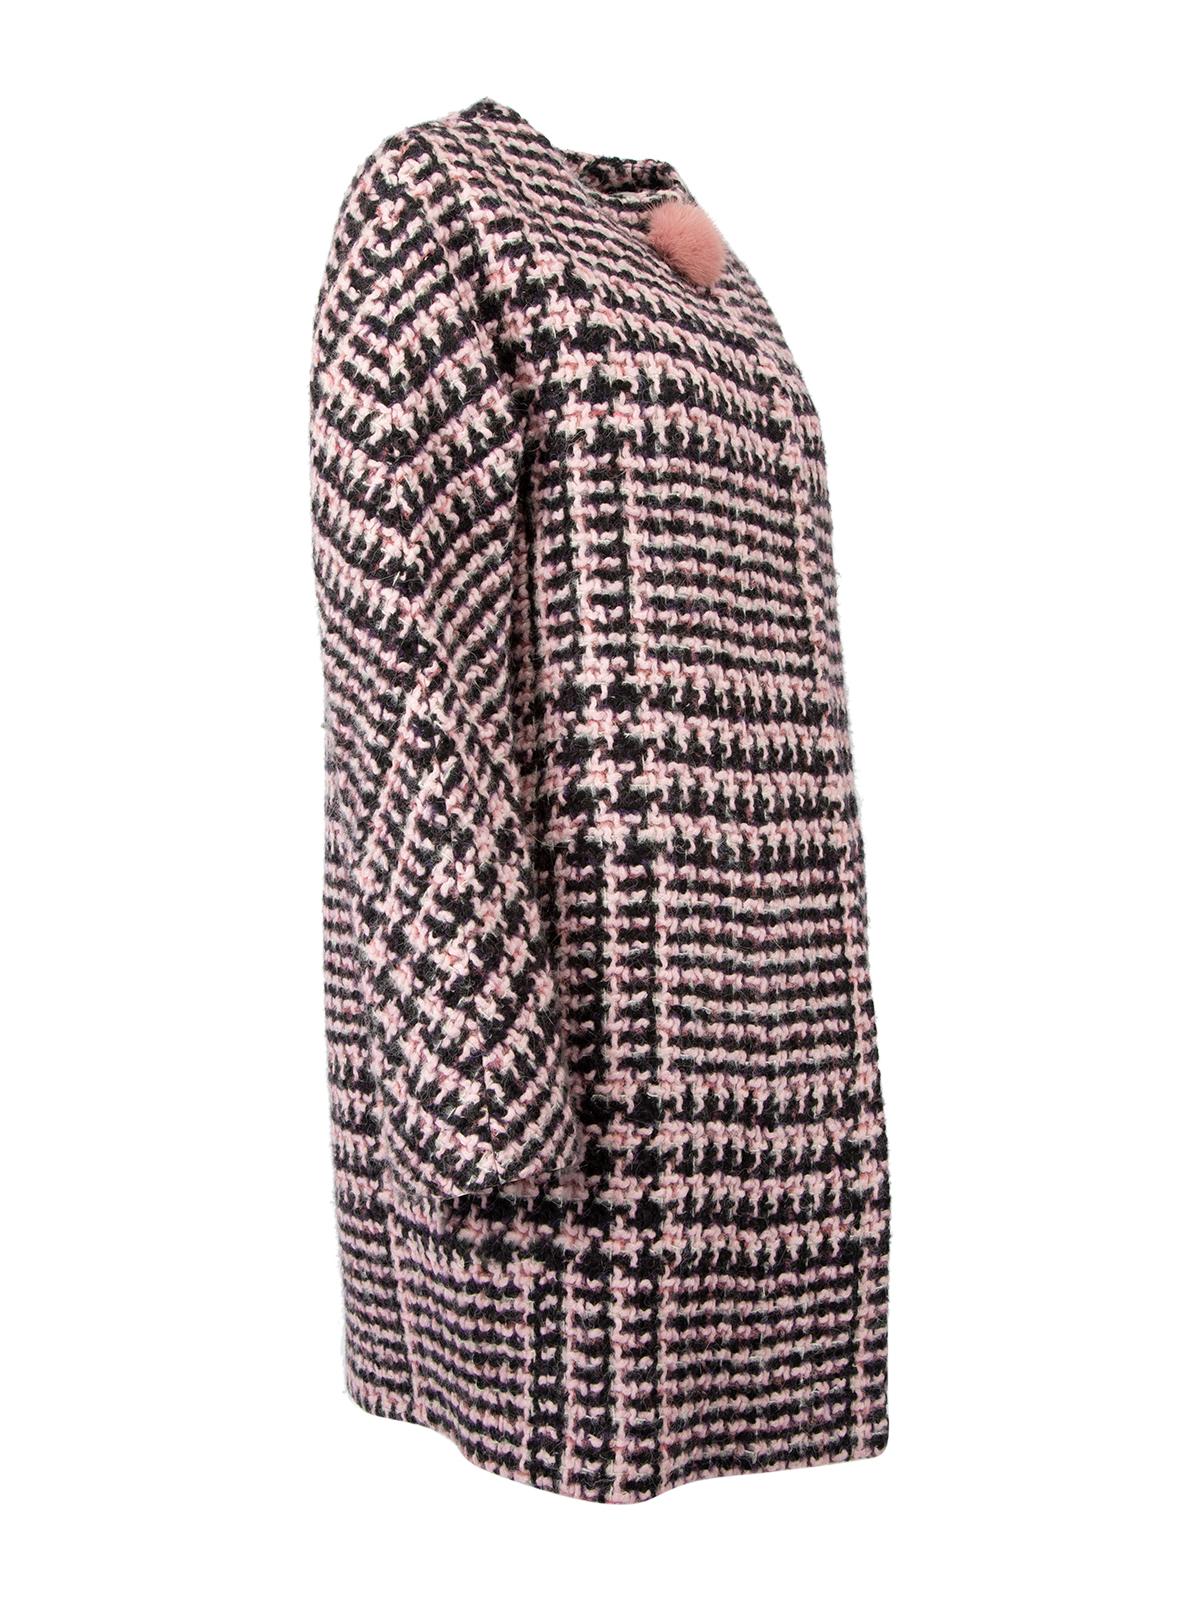 CONDITION is Very good. Minimal wear to jacket is evident. Minimal wear to to the outer wool fabric where loose fibres and thread can be seen on this used Ermanno Scervino designer resale item. Details Pink and brown Tweed Long coat Long sleeves 2x